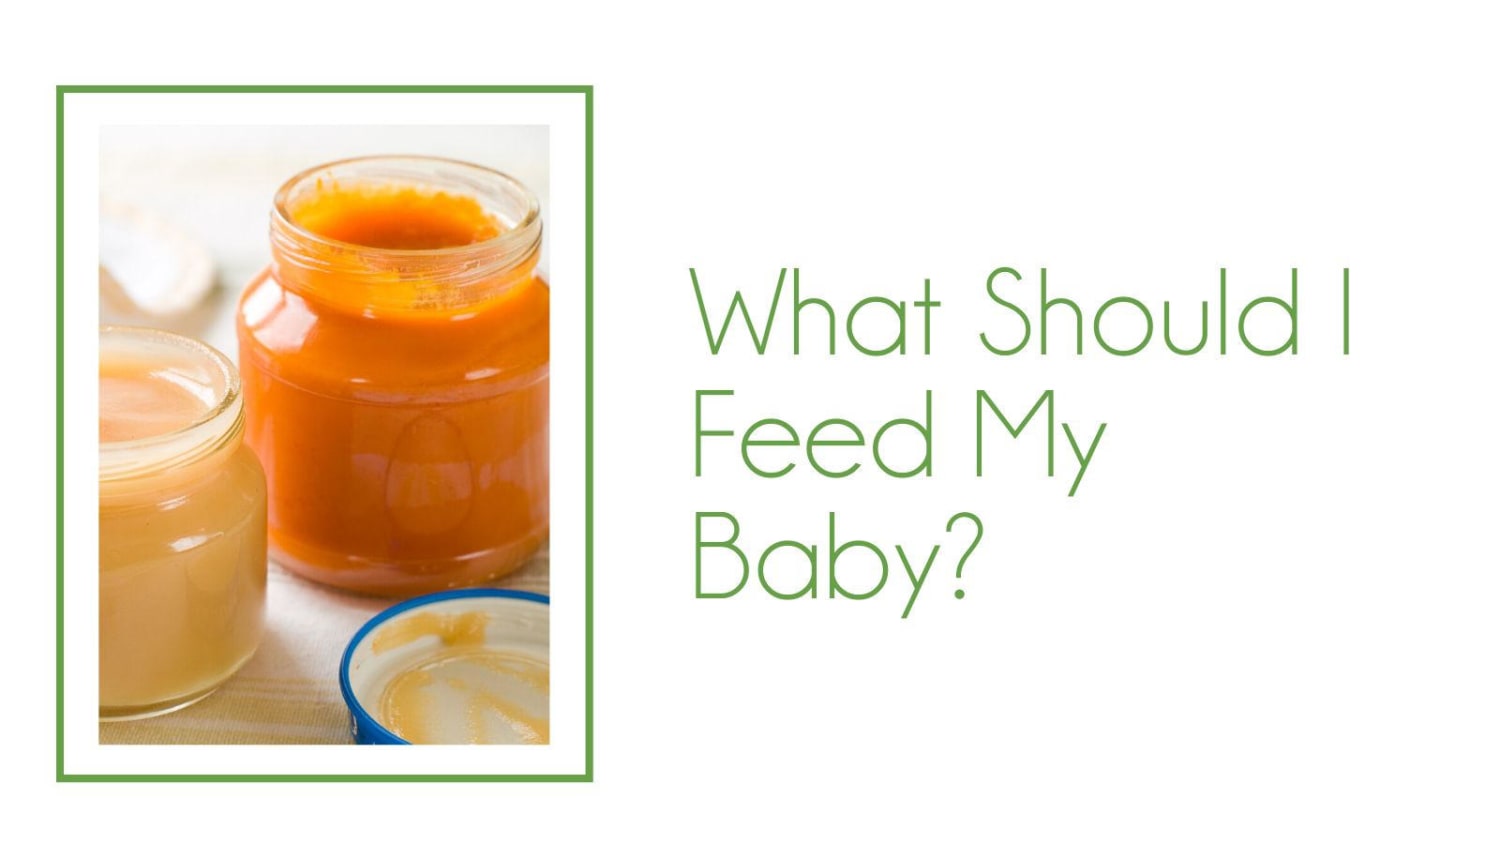 What Should I Feed My Baby?